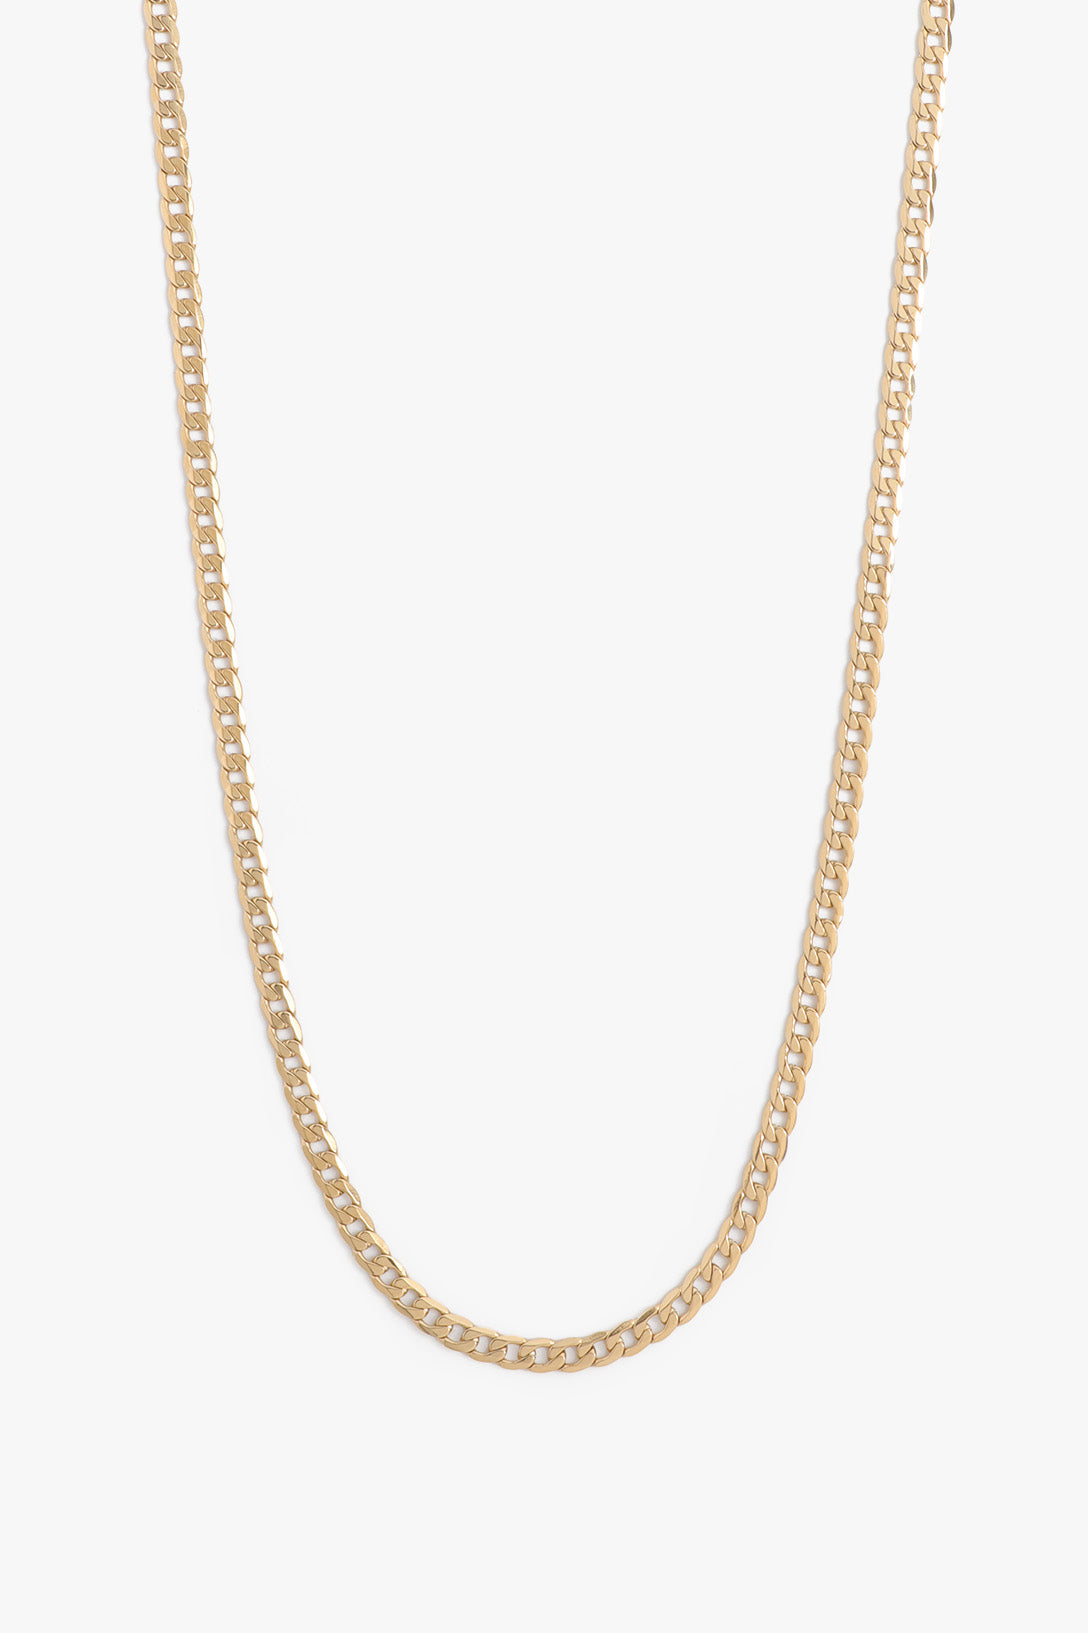 Marrin Costello Jewelry Callie 24 Inch Chain small cuban link chain with lobster clasp closure.Waterproof, sustainable, hypoallergenic. 14k gold plated stainless steel.